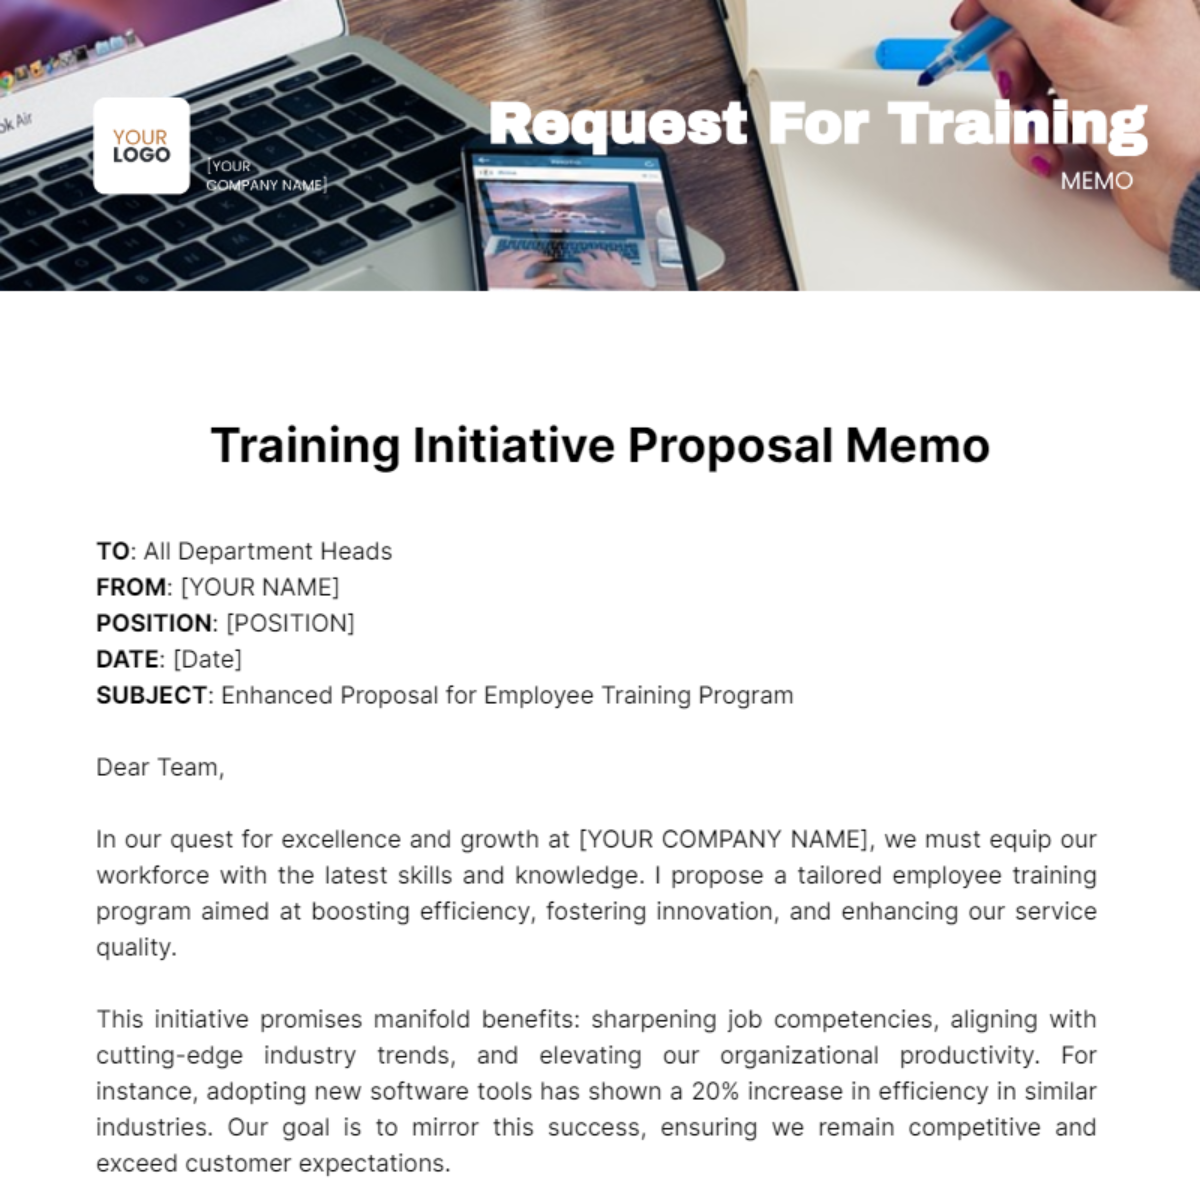 Request For Training Memo Template